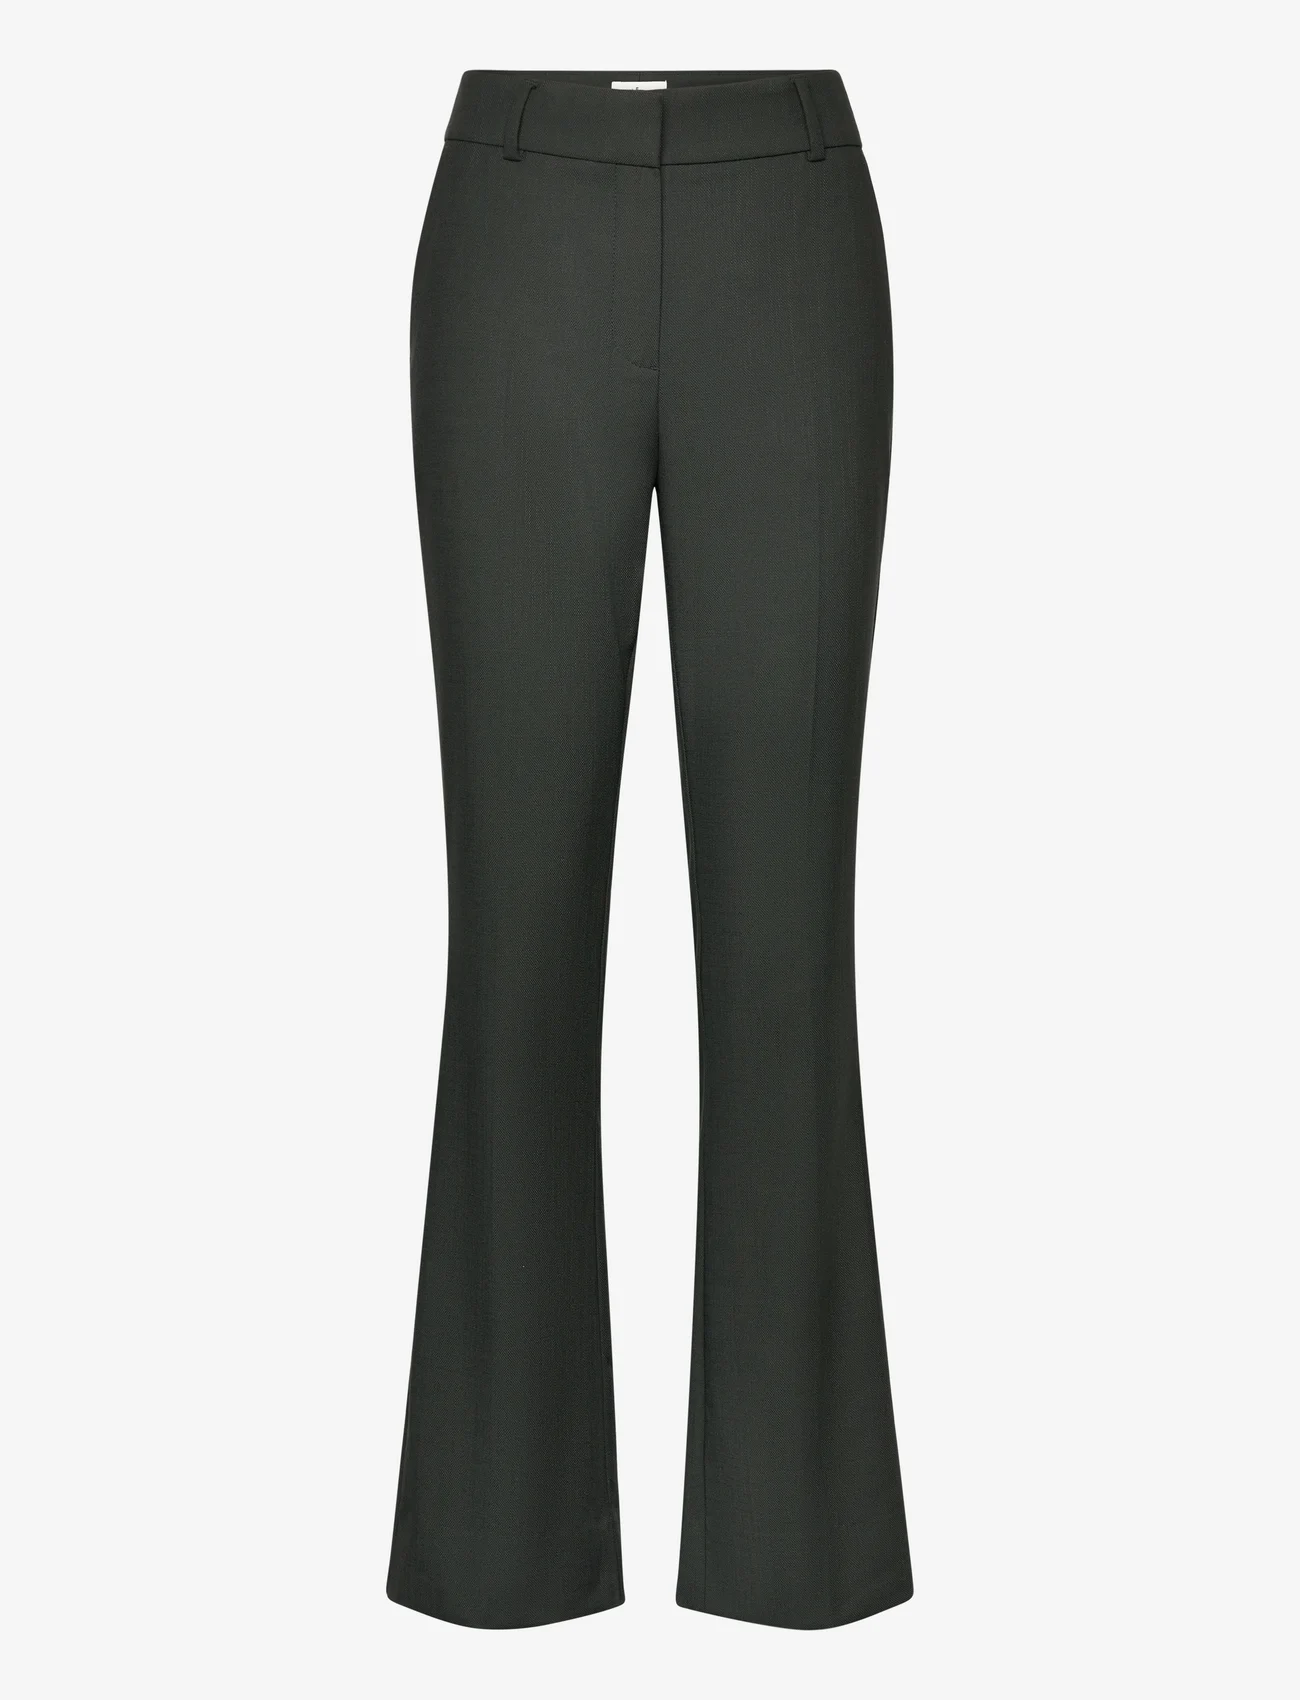 FIVEUNITS - Clara - trousers - forest green - 0